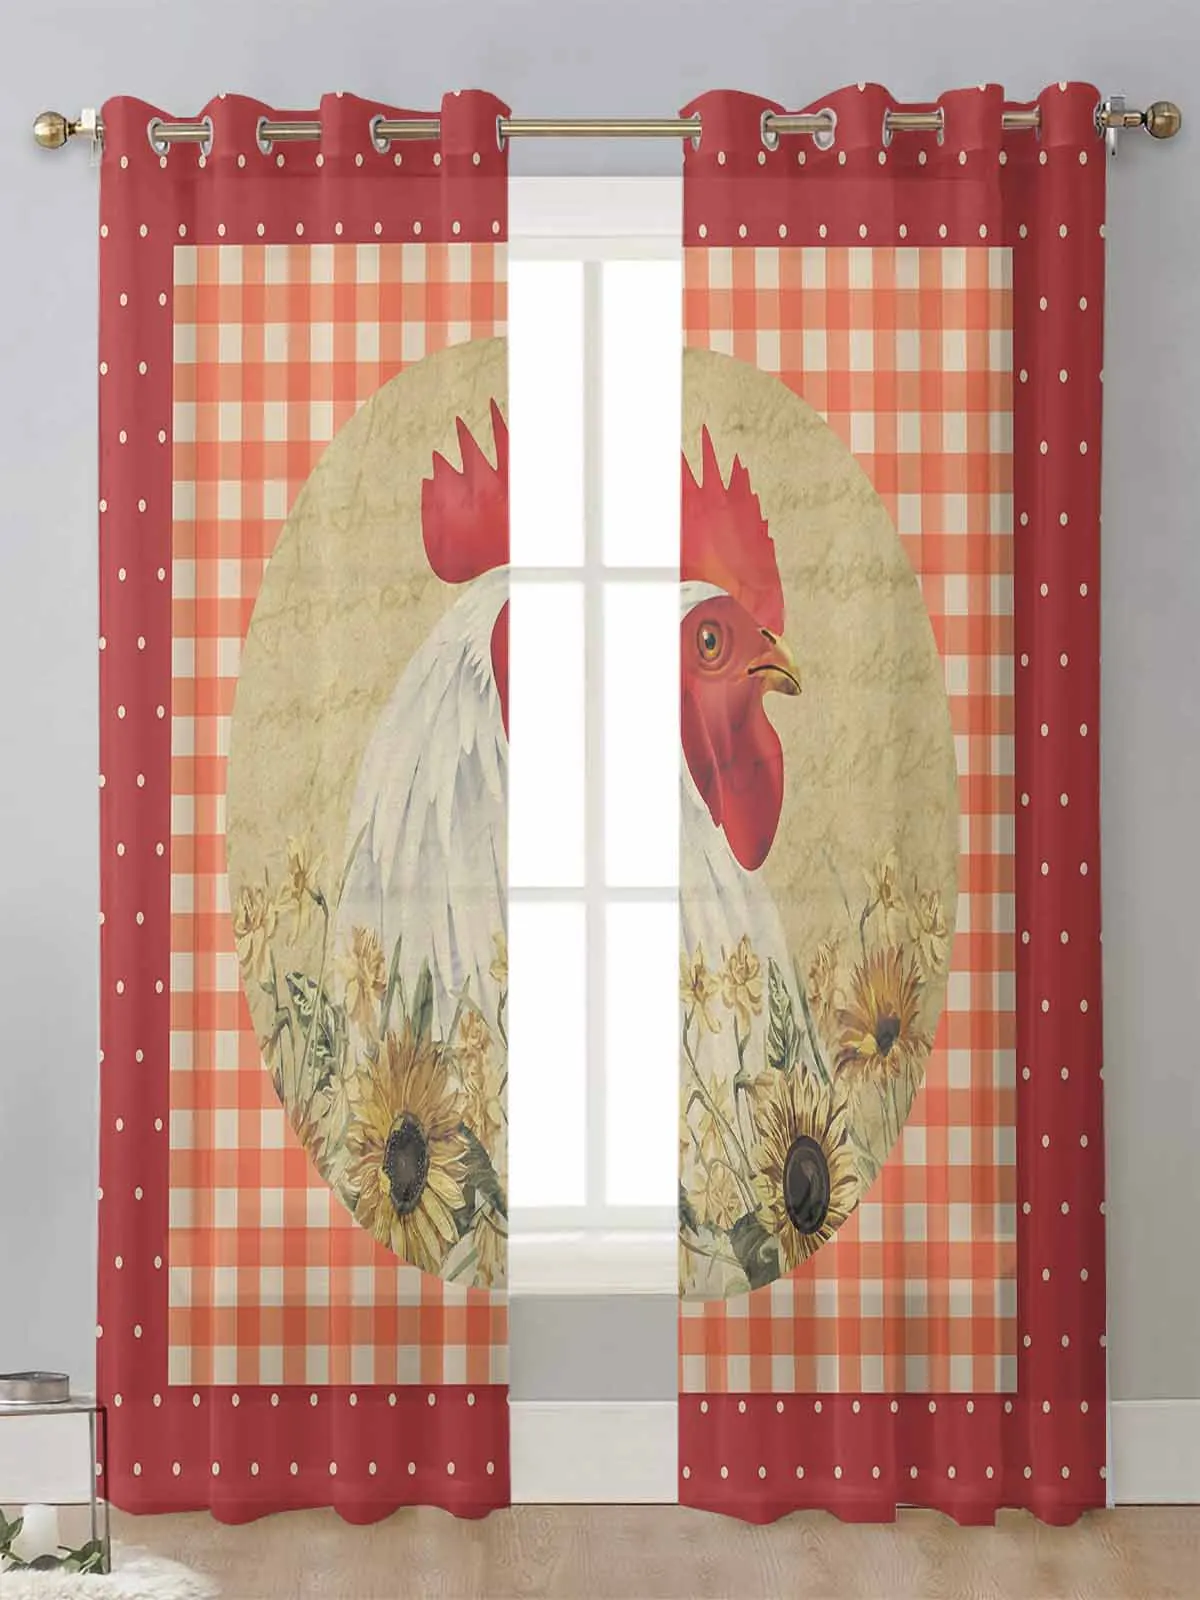 

Rooster Sunflower Flower Retro Polka Dot Sheer Curtains For Living Room Window Voile Tulle Curtain Cortinas Drapes Home Decor